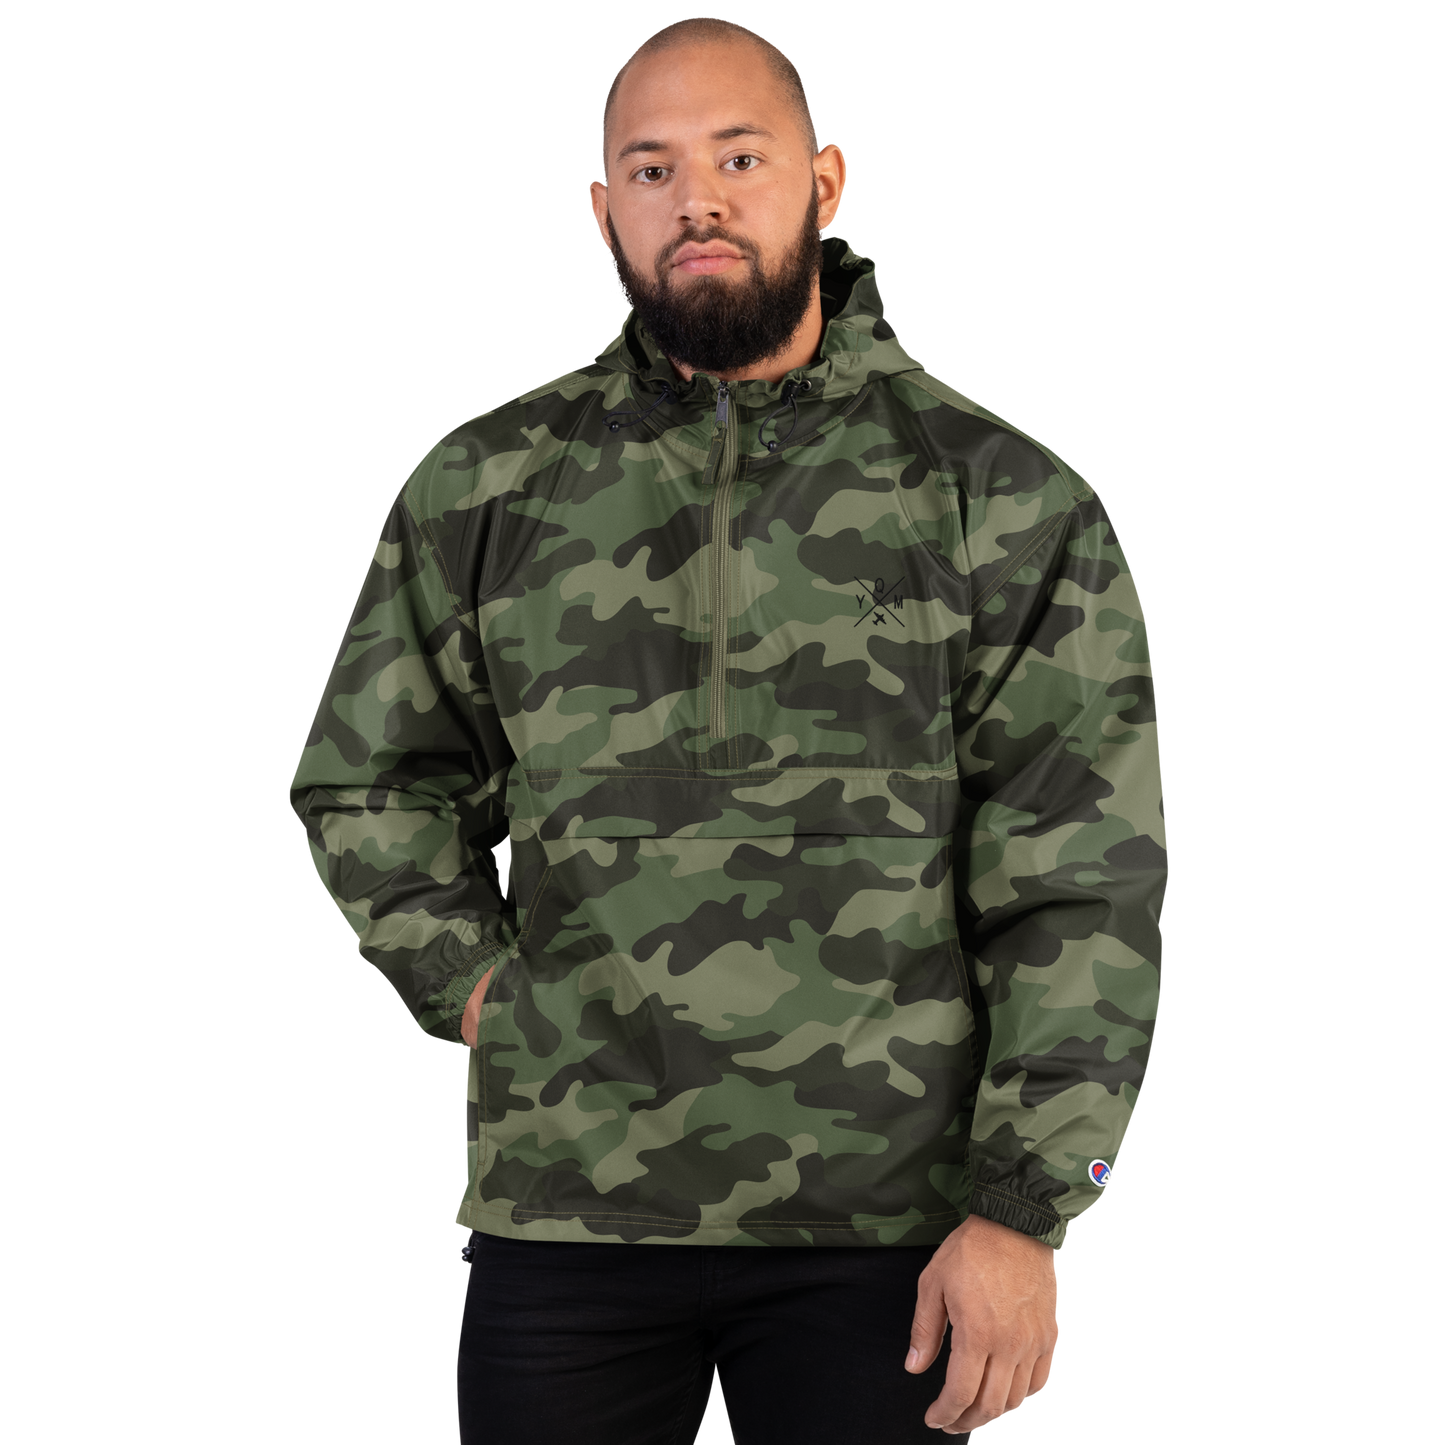 Crossed-X Packable Jacket • YQM Moncton • YHM Designs - Image 13